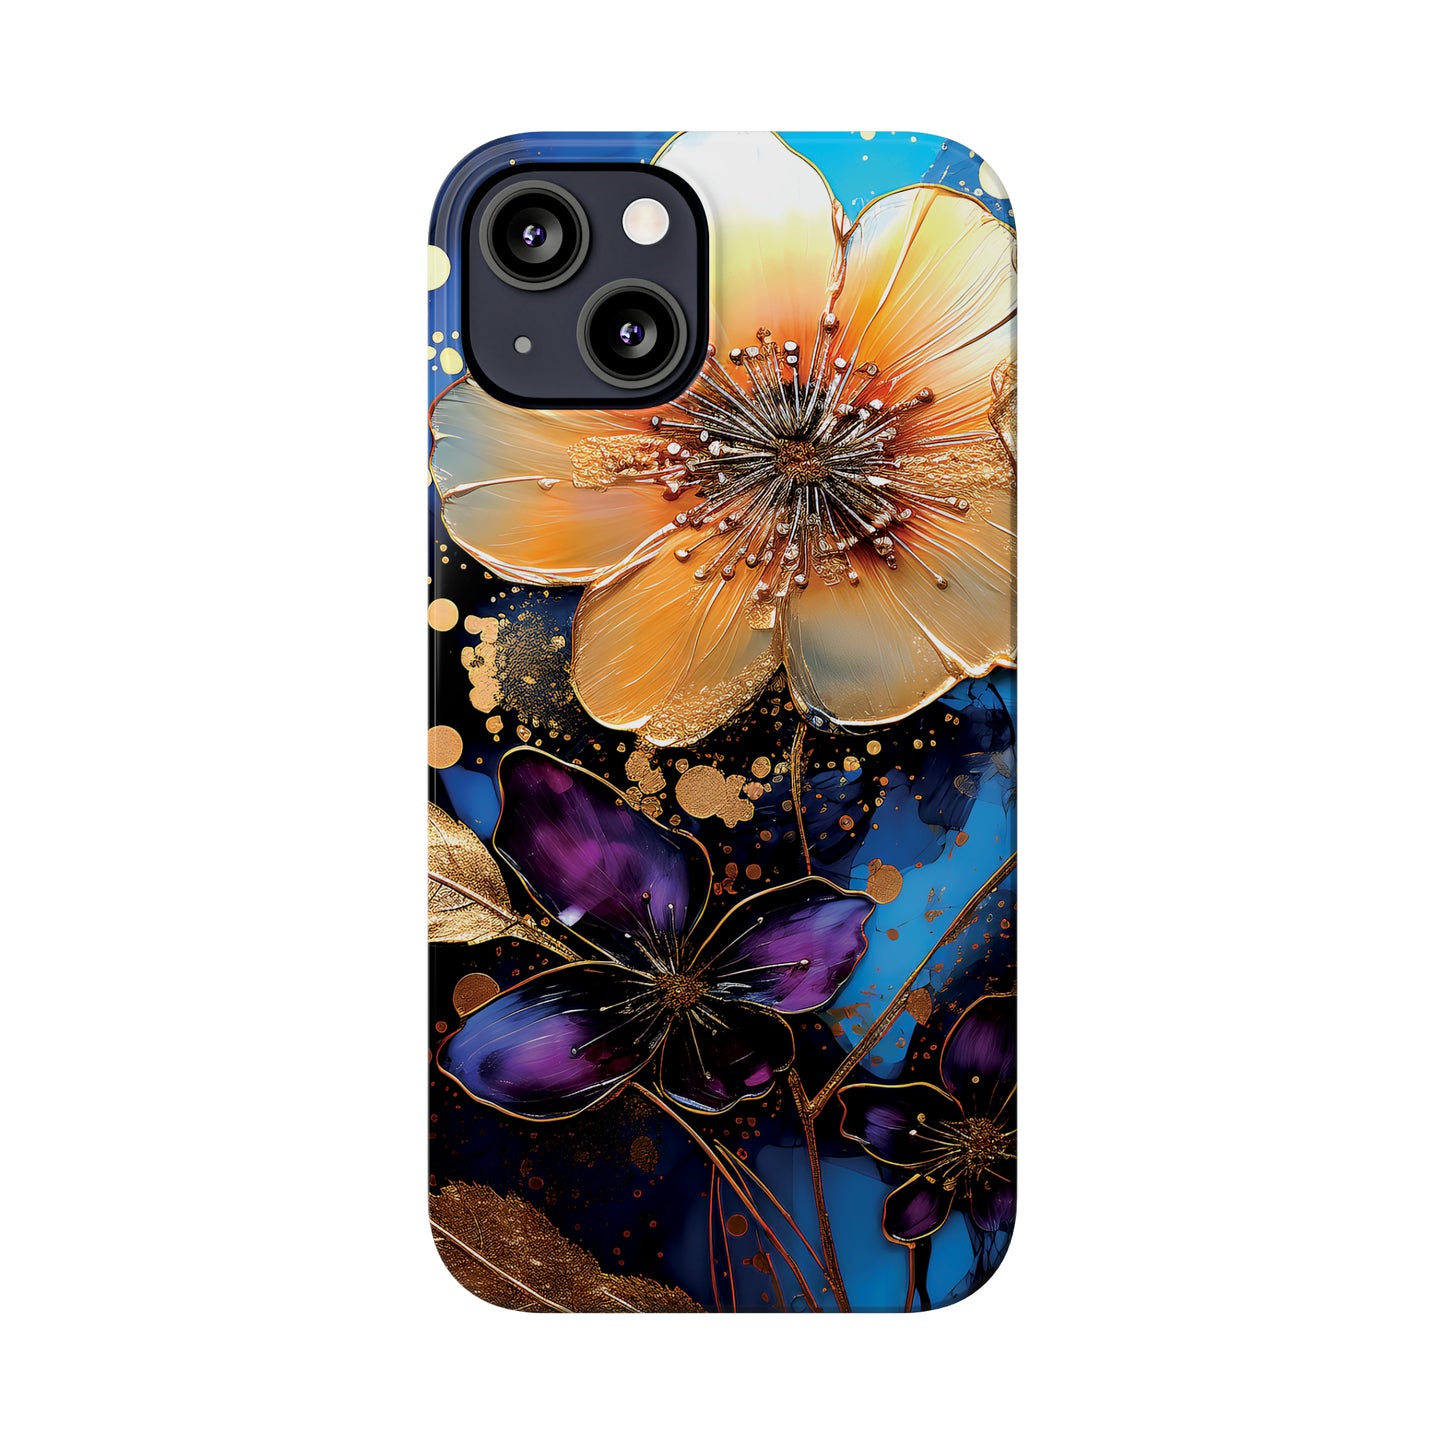 Astral Infusion iPhone Case